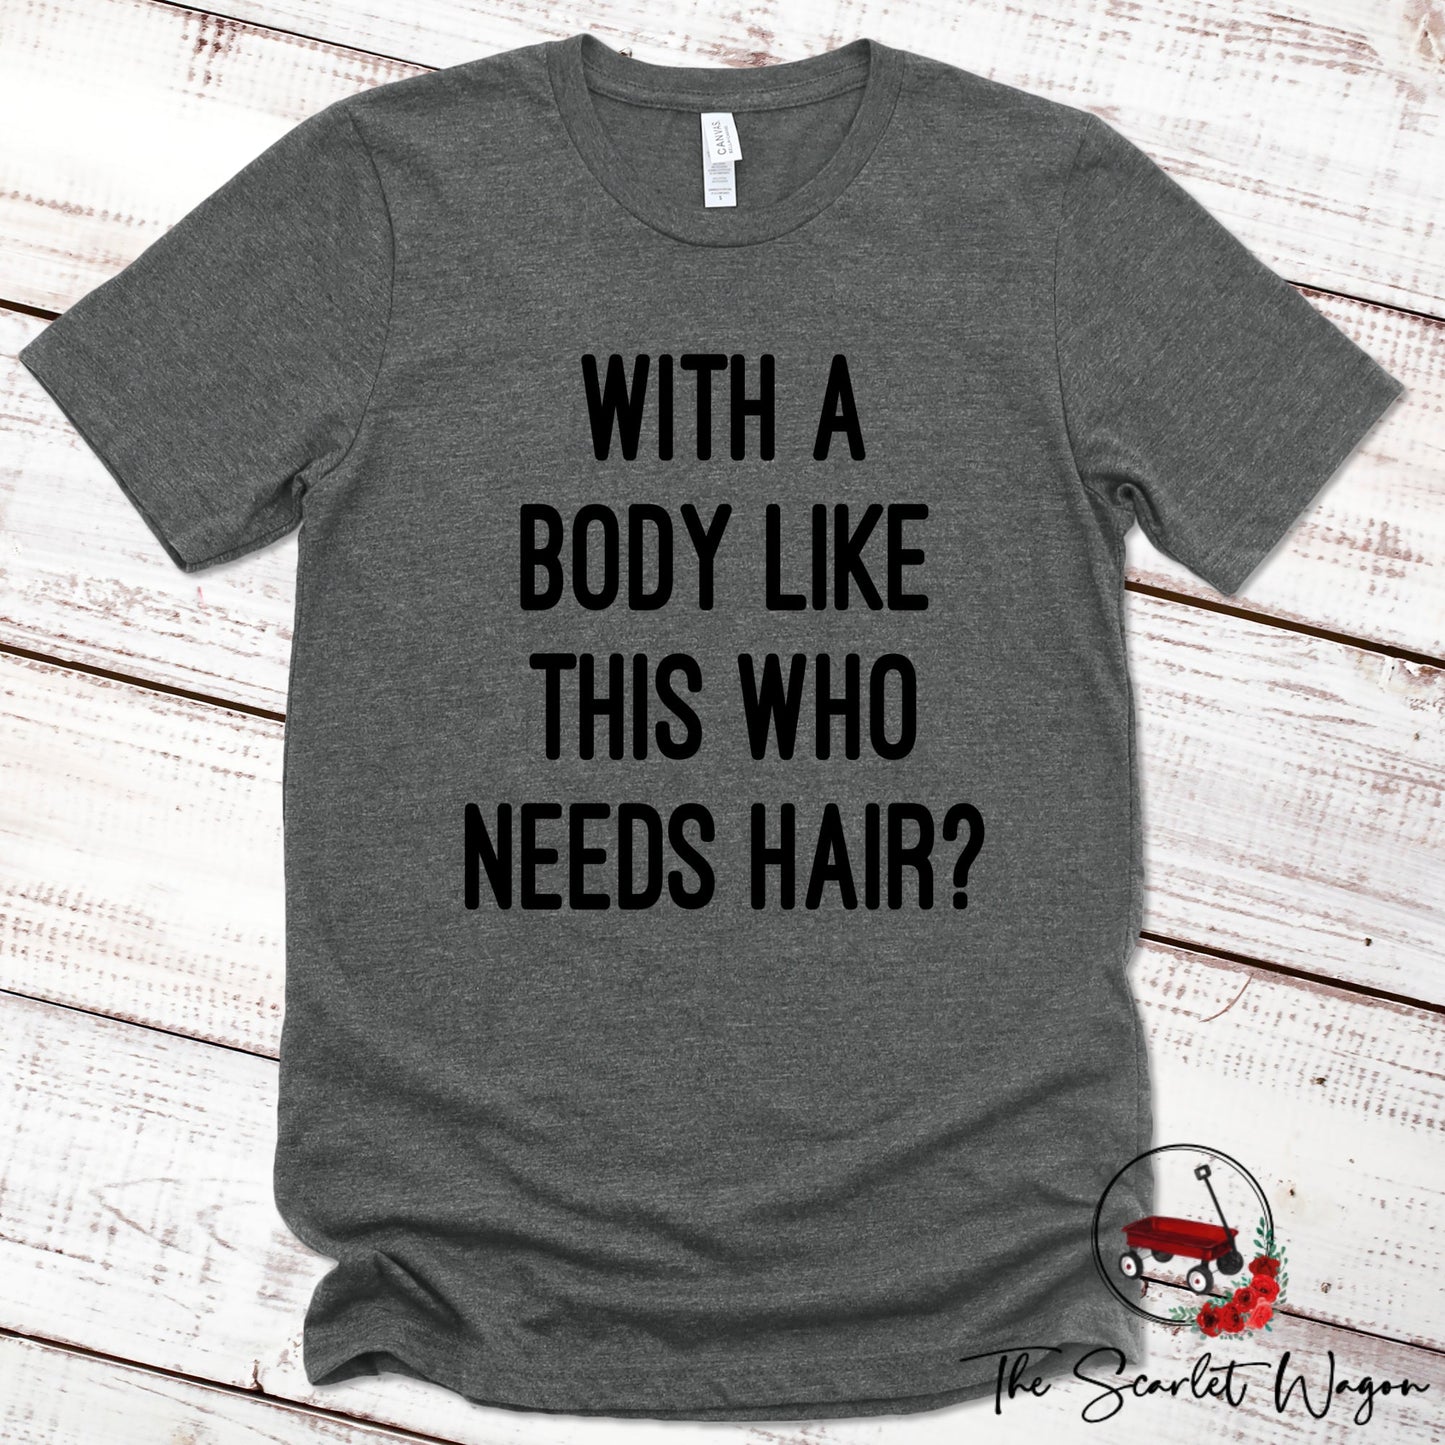 With a Body Like This Who Needs Hair Premium Tee Scarlet Wagon Deep Heather Gray XS 